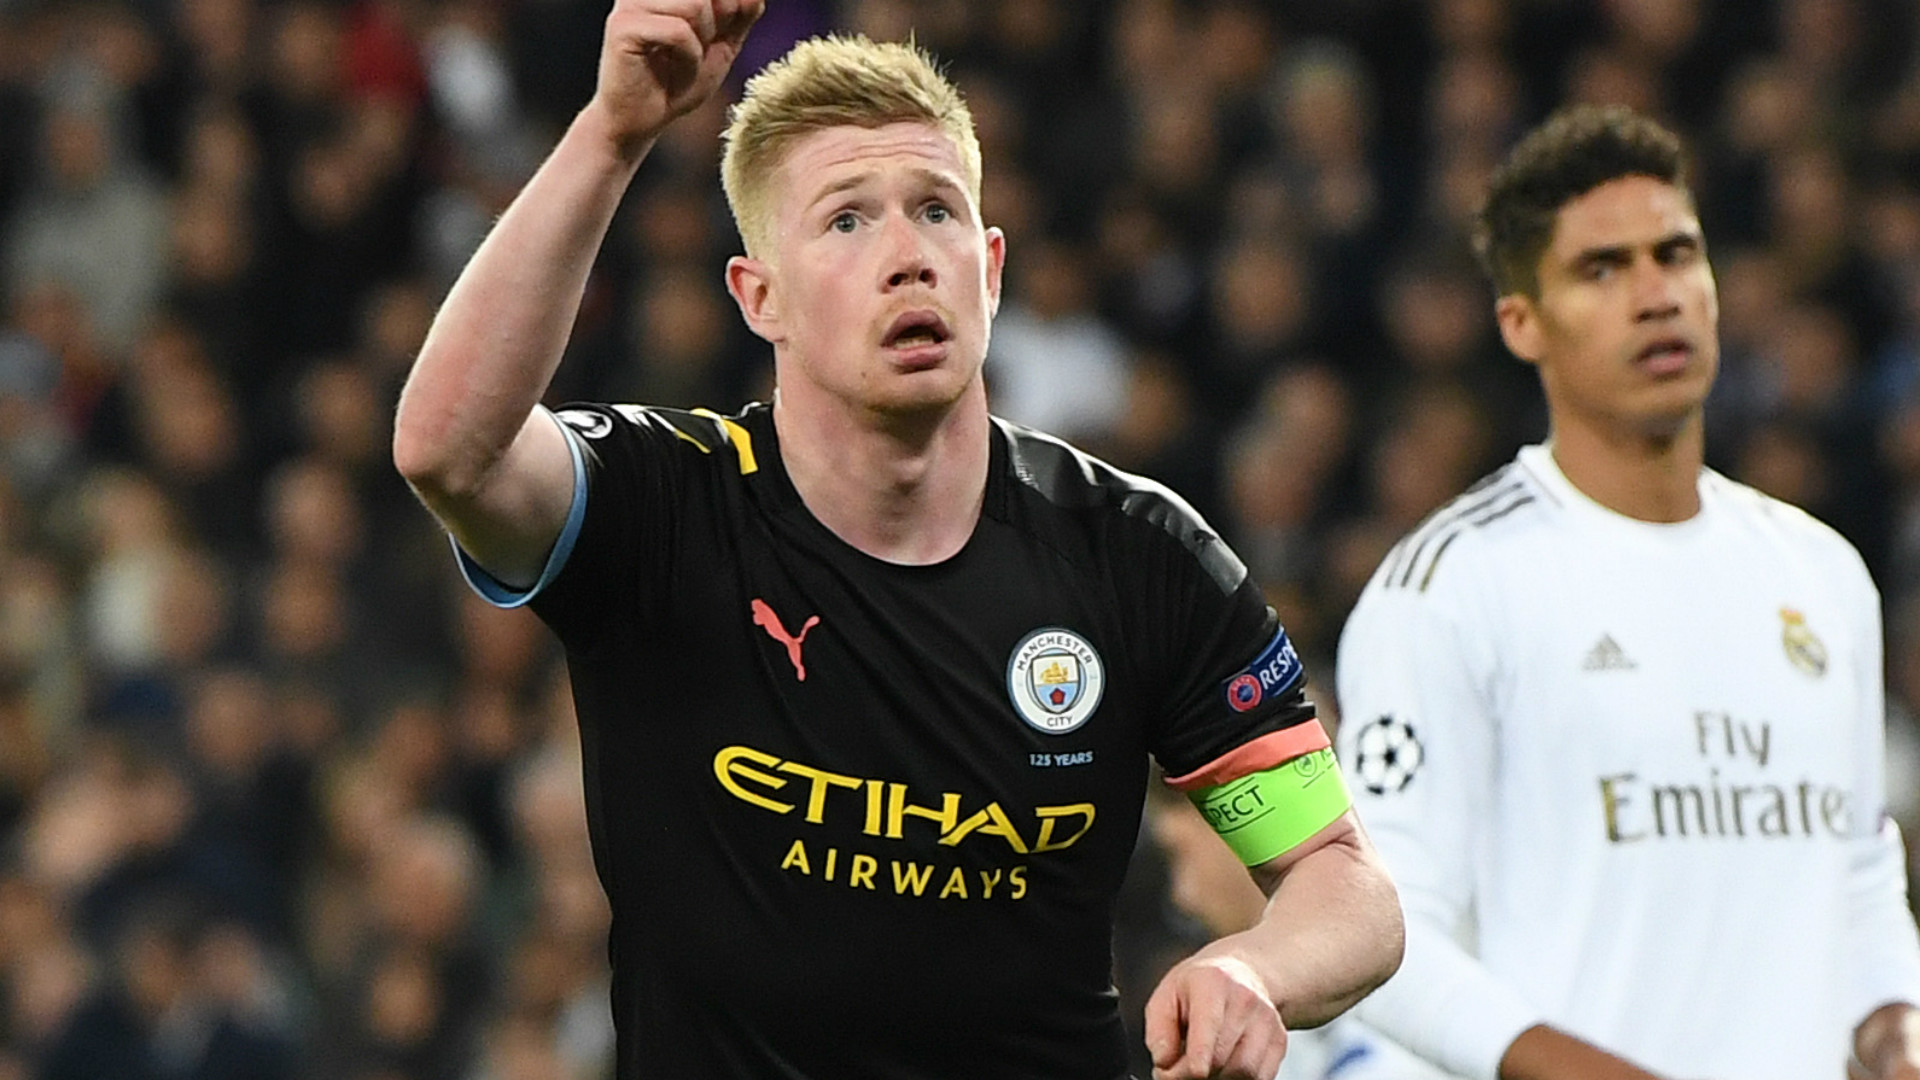 Martinez: De Bruyne has matured into an exceptional player